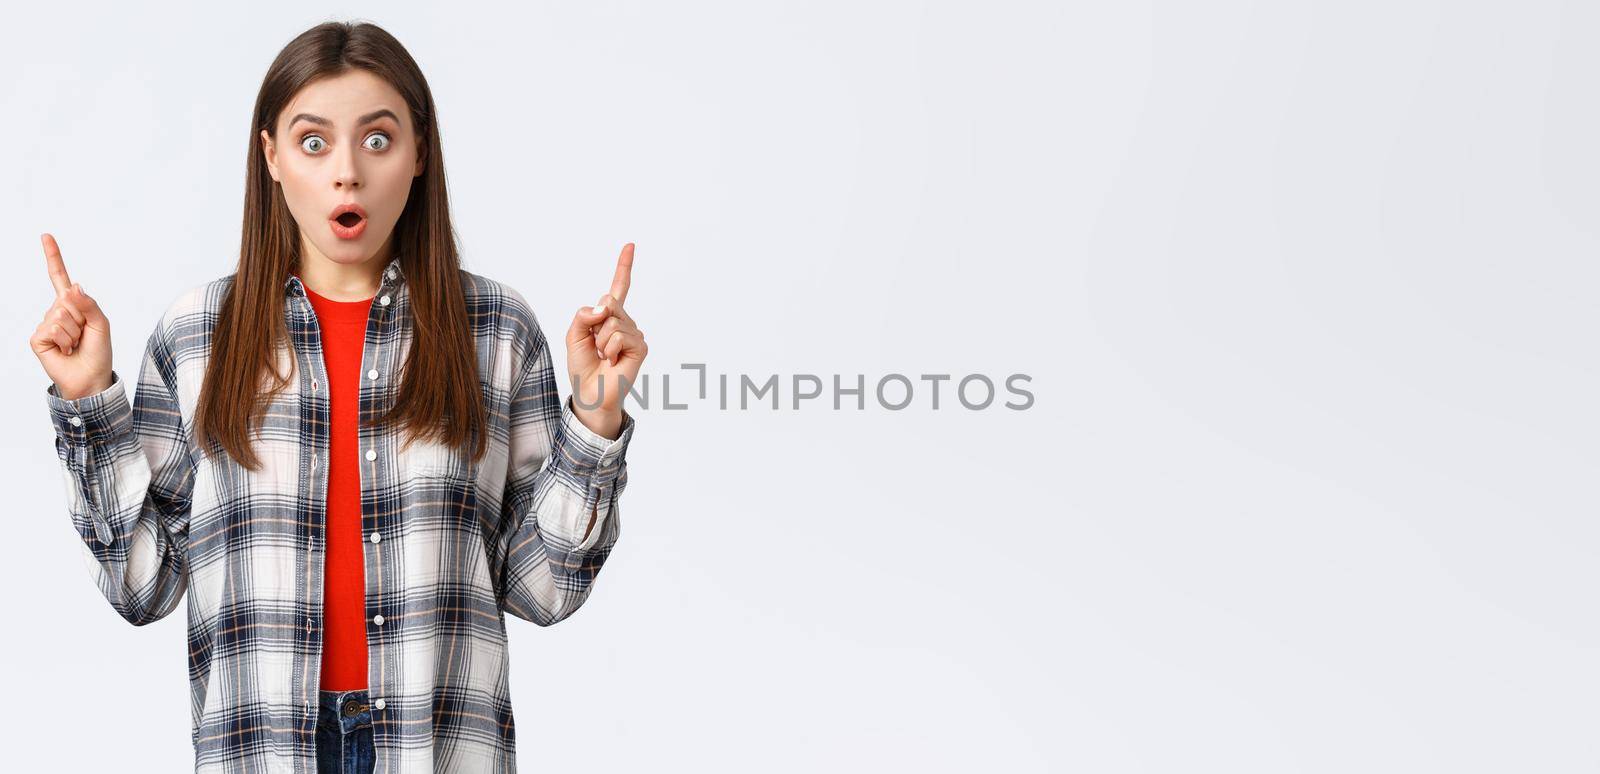 Lifestyle, different emotions, leisure activities concept. Astonished and speechless attractive girl in checked shirt pointing fingers up to tell news, drop jaw staring, make wow expression by Benzoix